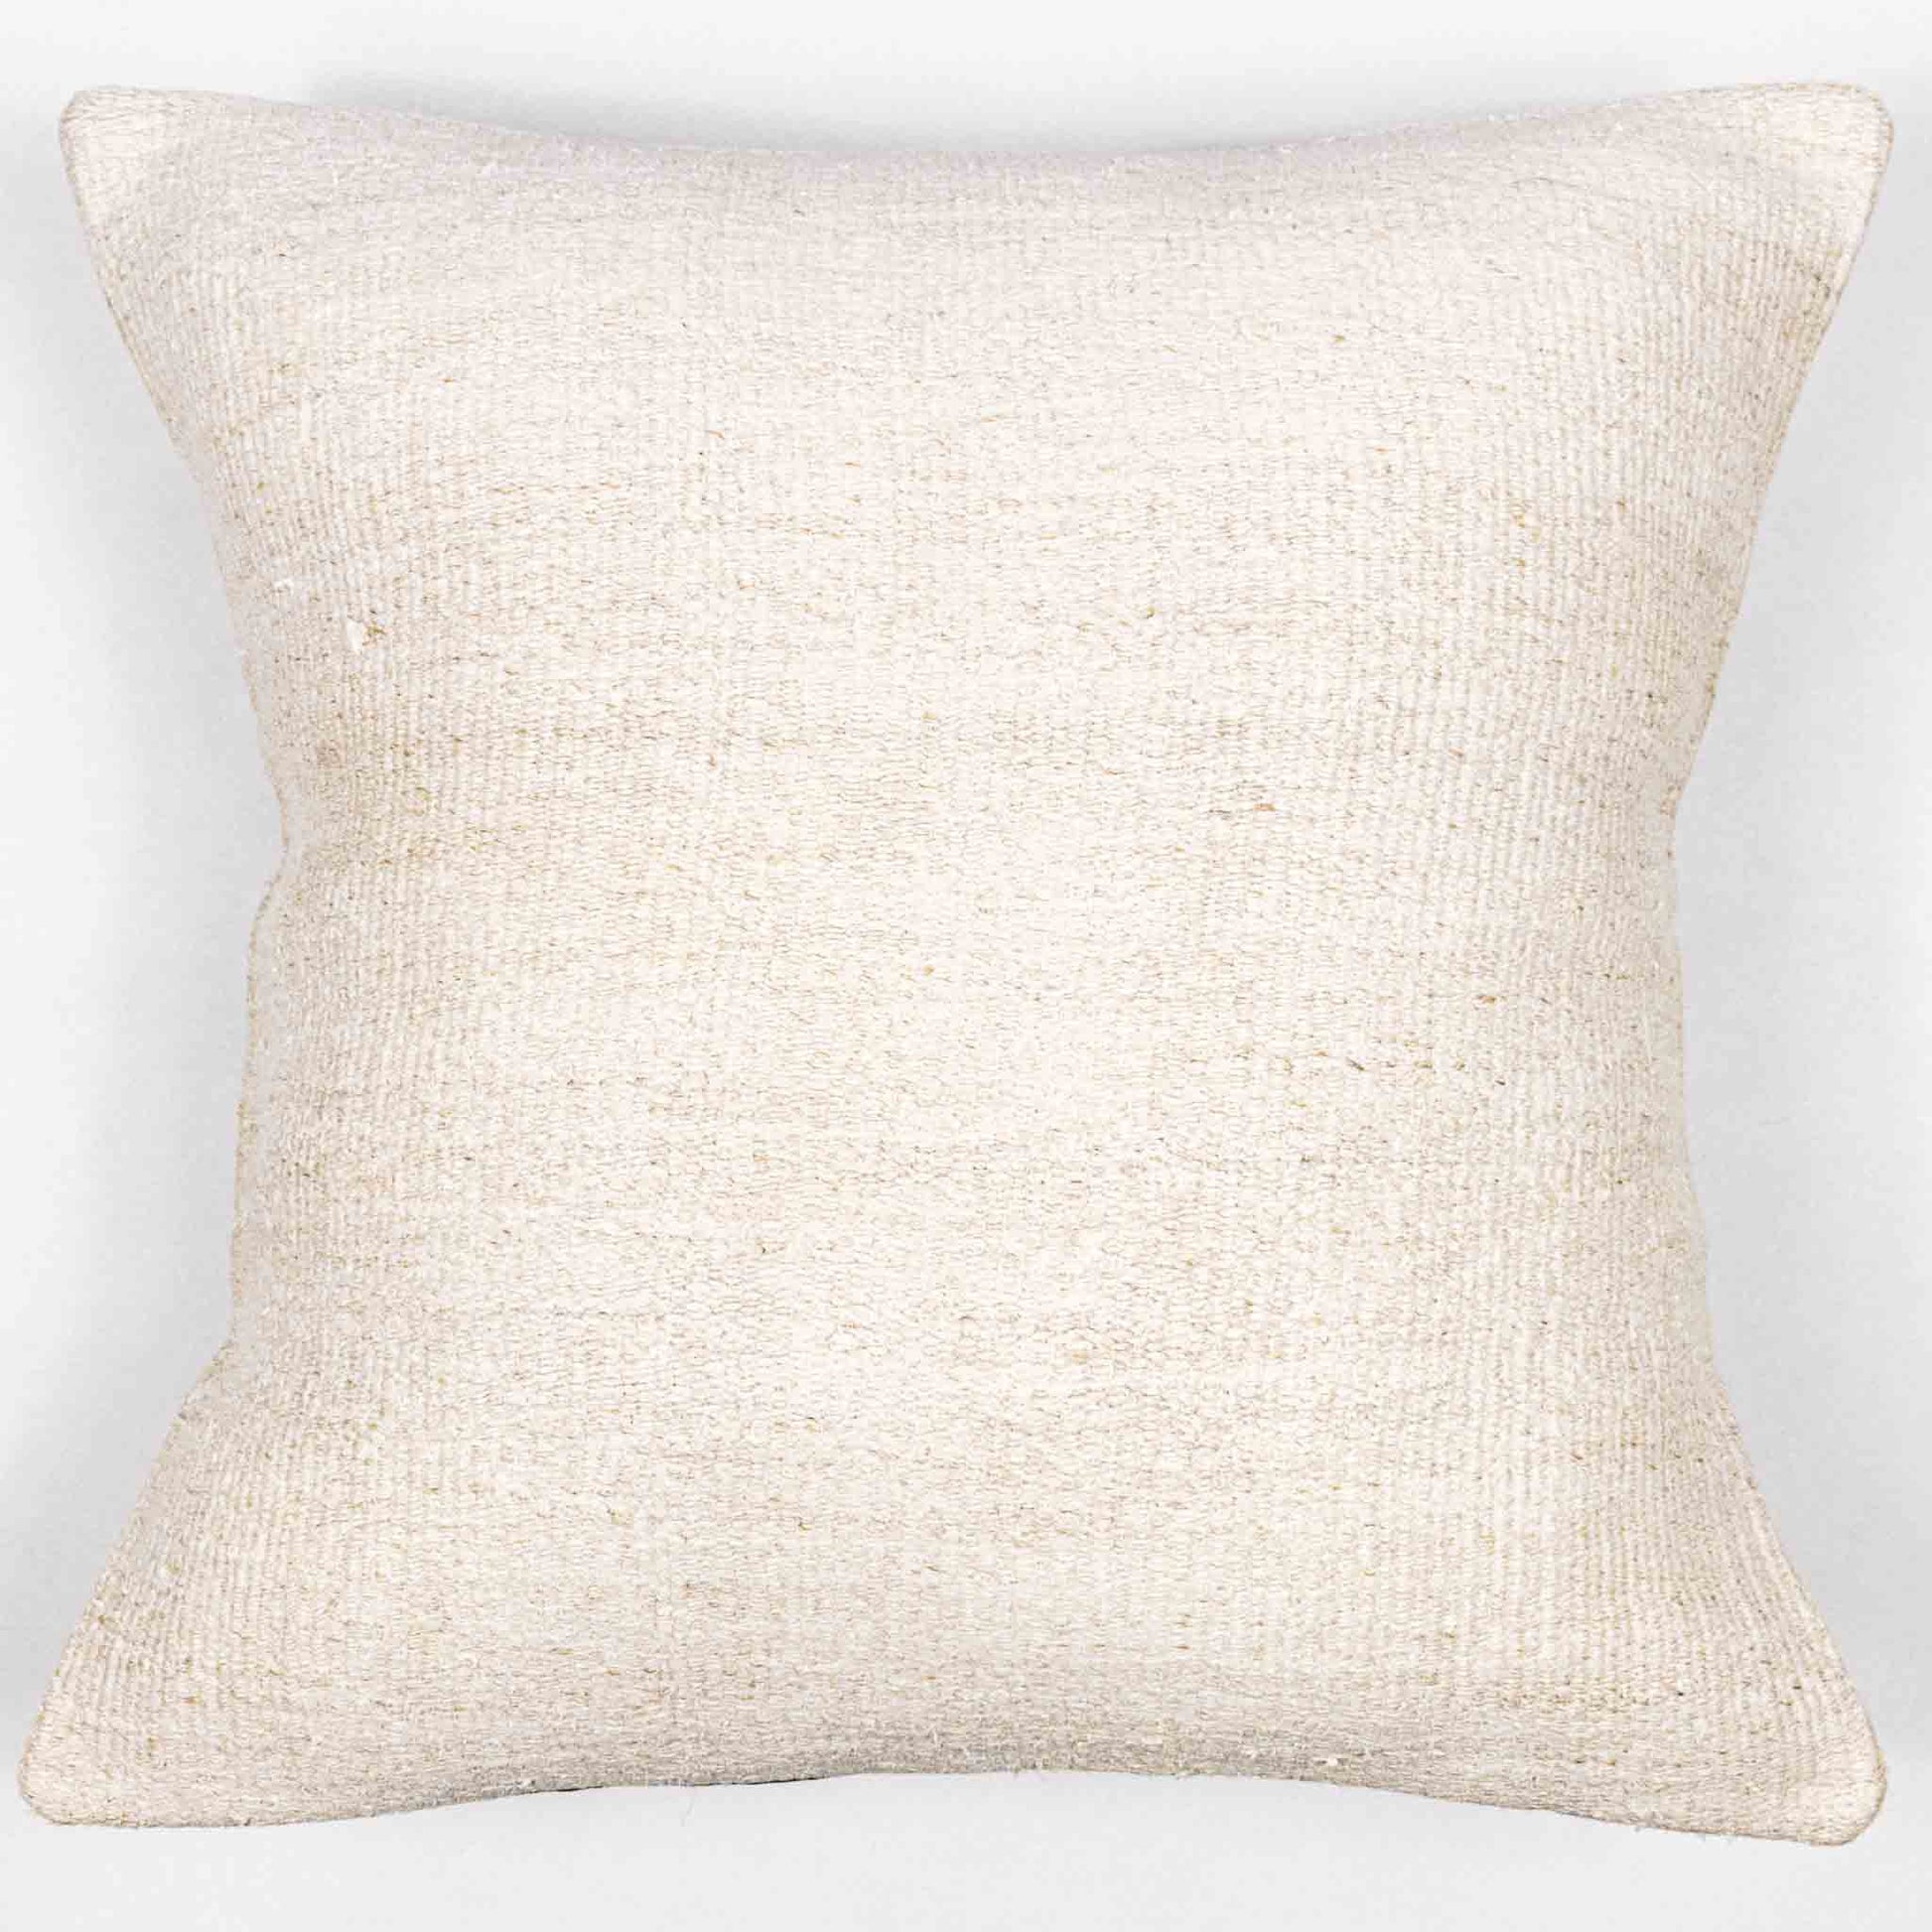 Handwoven Turkish kilim sisal pillow cover in ivory white and sand.